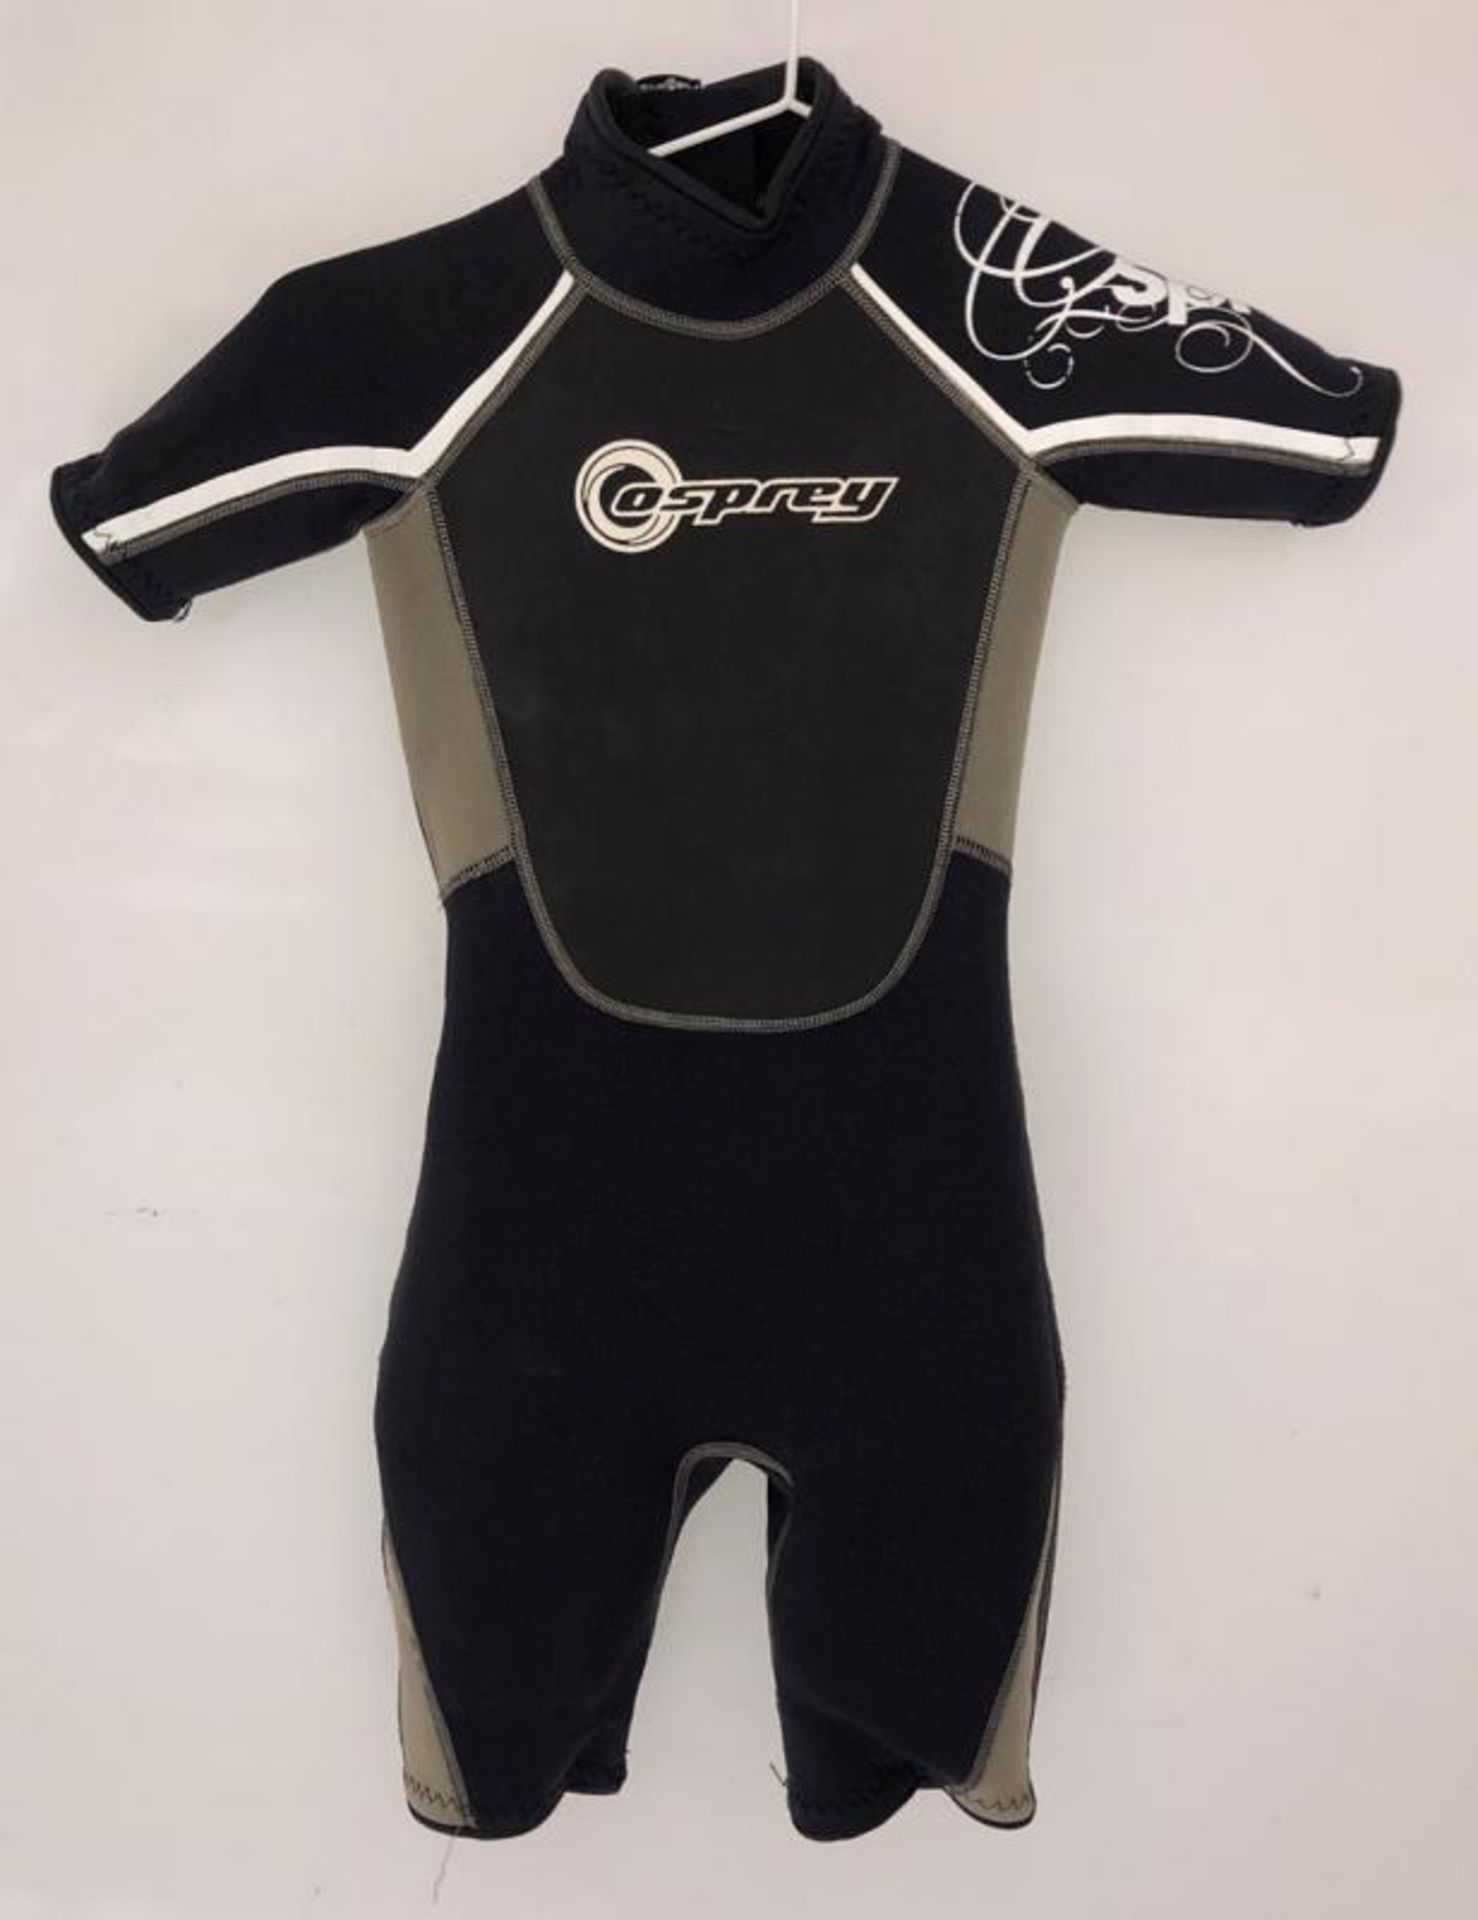 3 x Junior Wetsuit's - Ref: NS349, NS351, NS347 - CL349 - Location: Altrincham WA14 - Used In Good C - Image 5 of 10